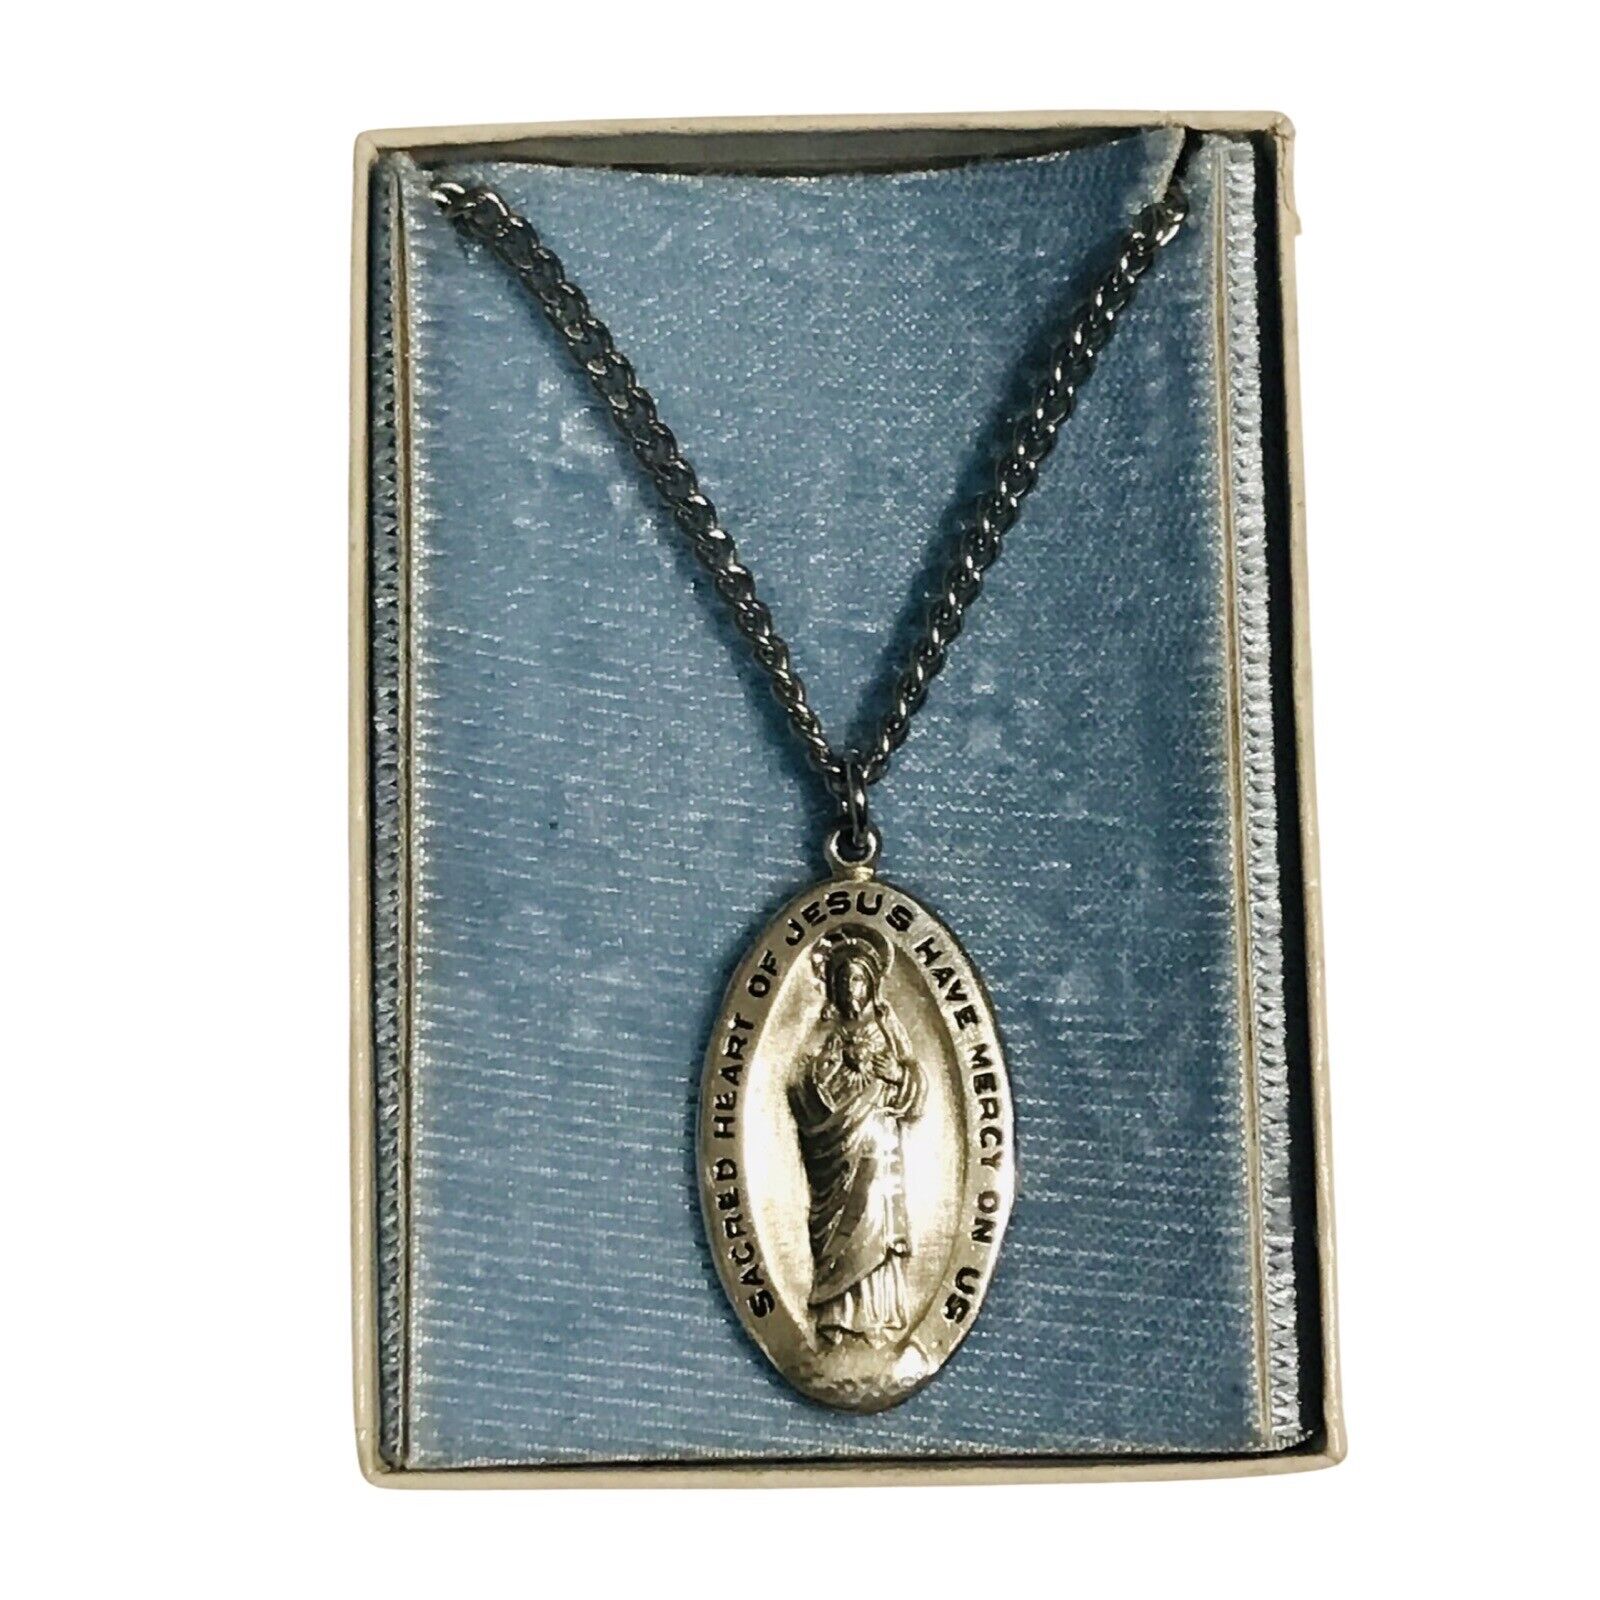 VINTAGE OUR LADY OF MOUNT CARMEL STERLING SILVER PENDANT NECKLACE